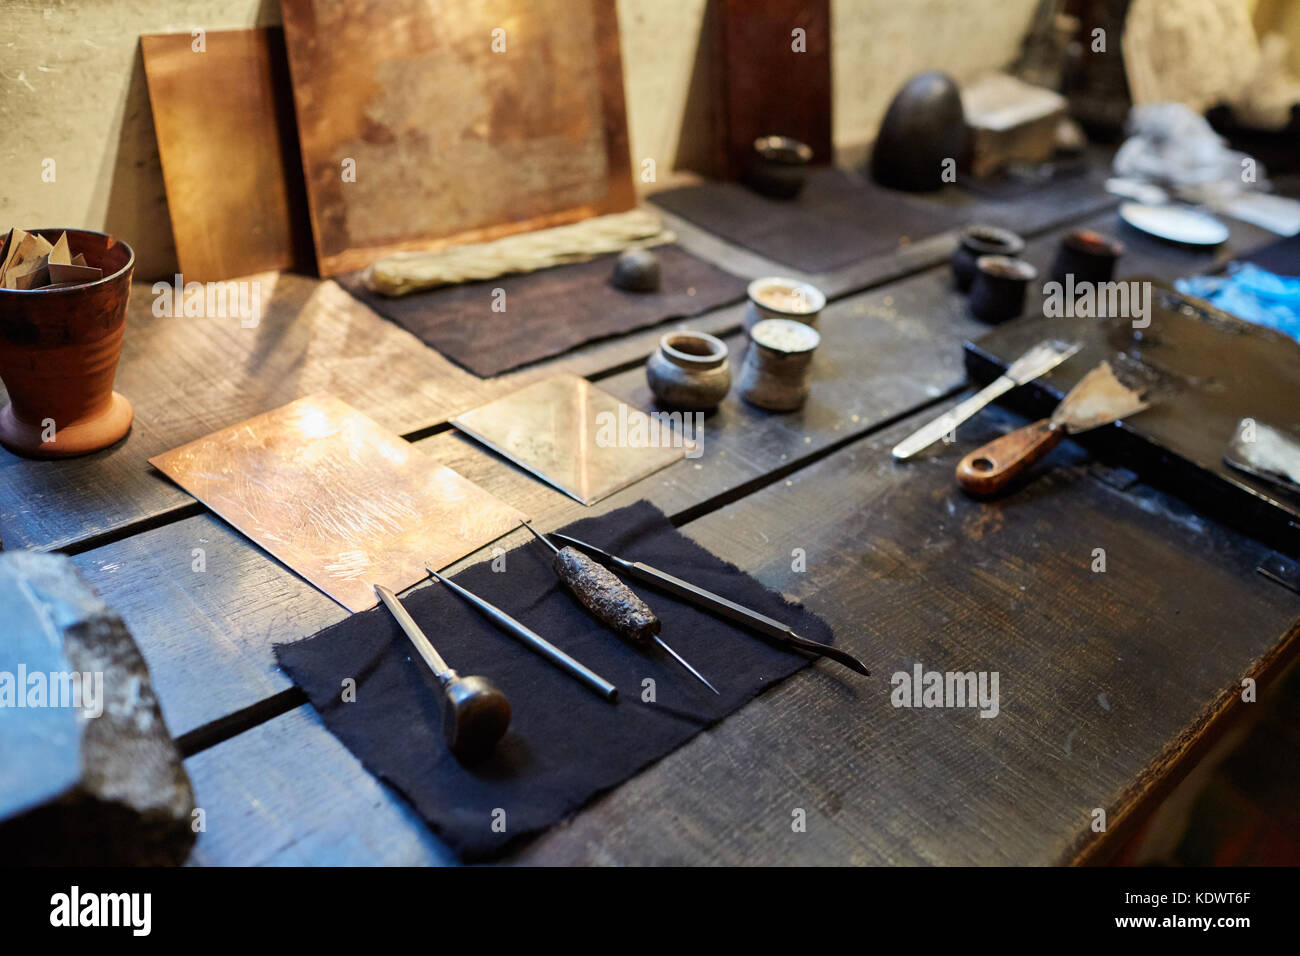 Rembrandt House Museum in Amsterdam Stock Photo